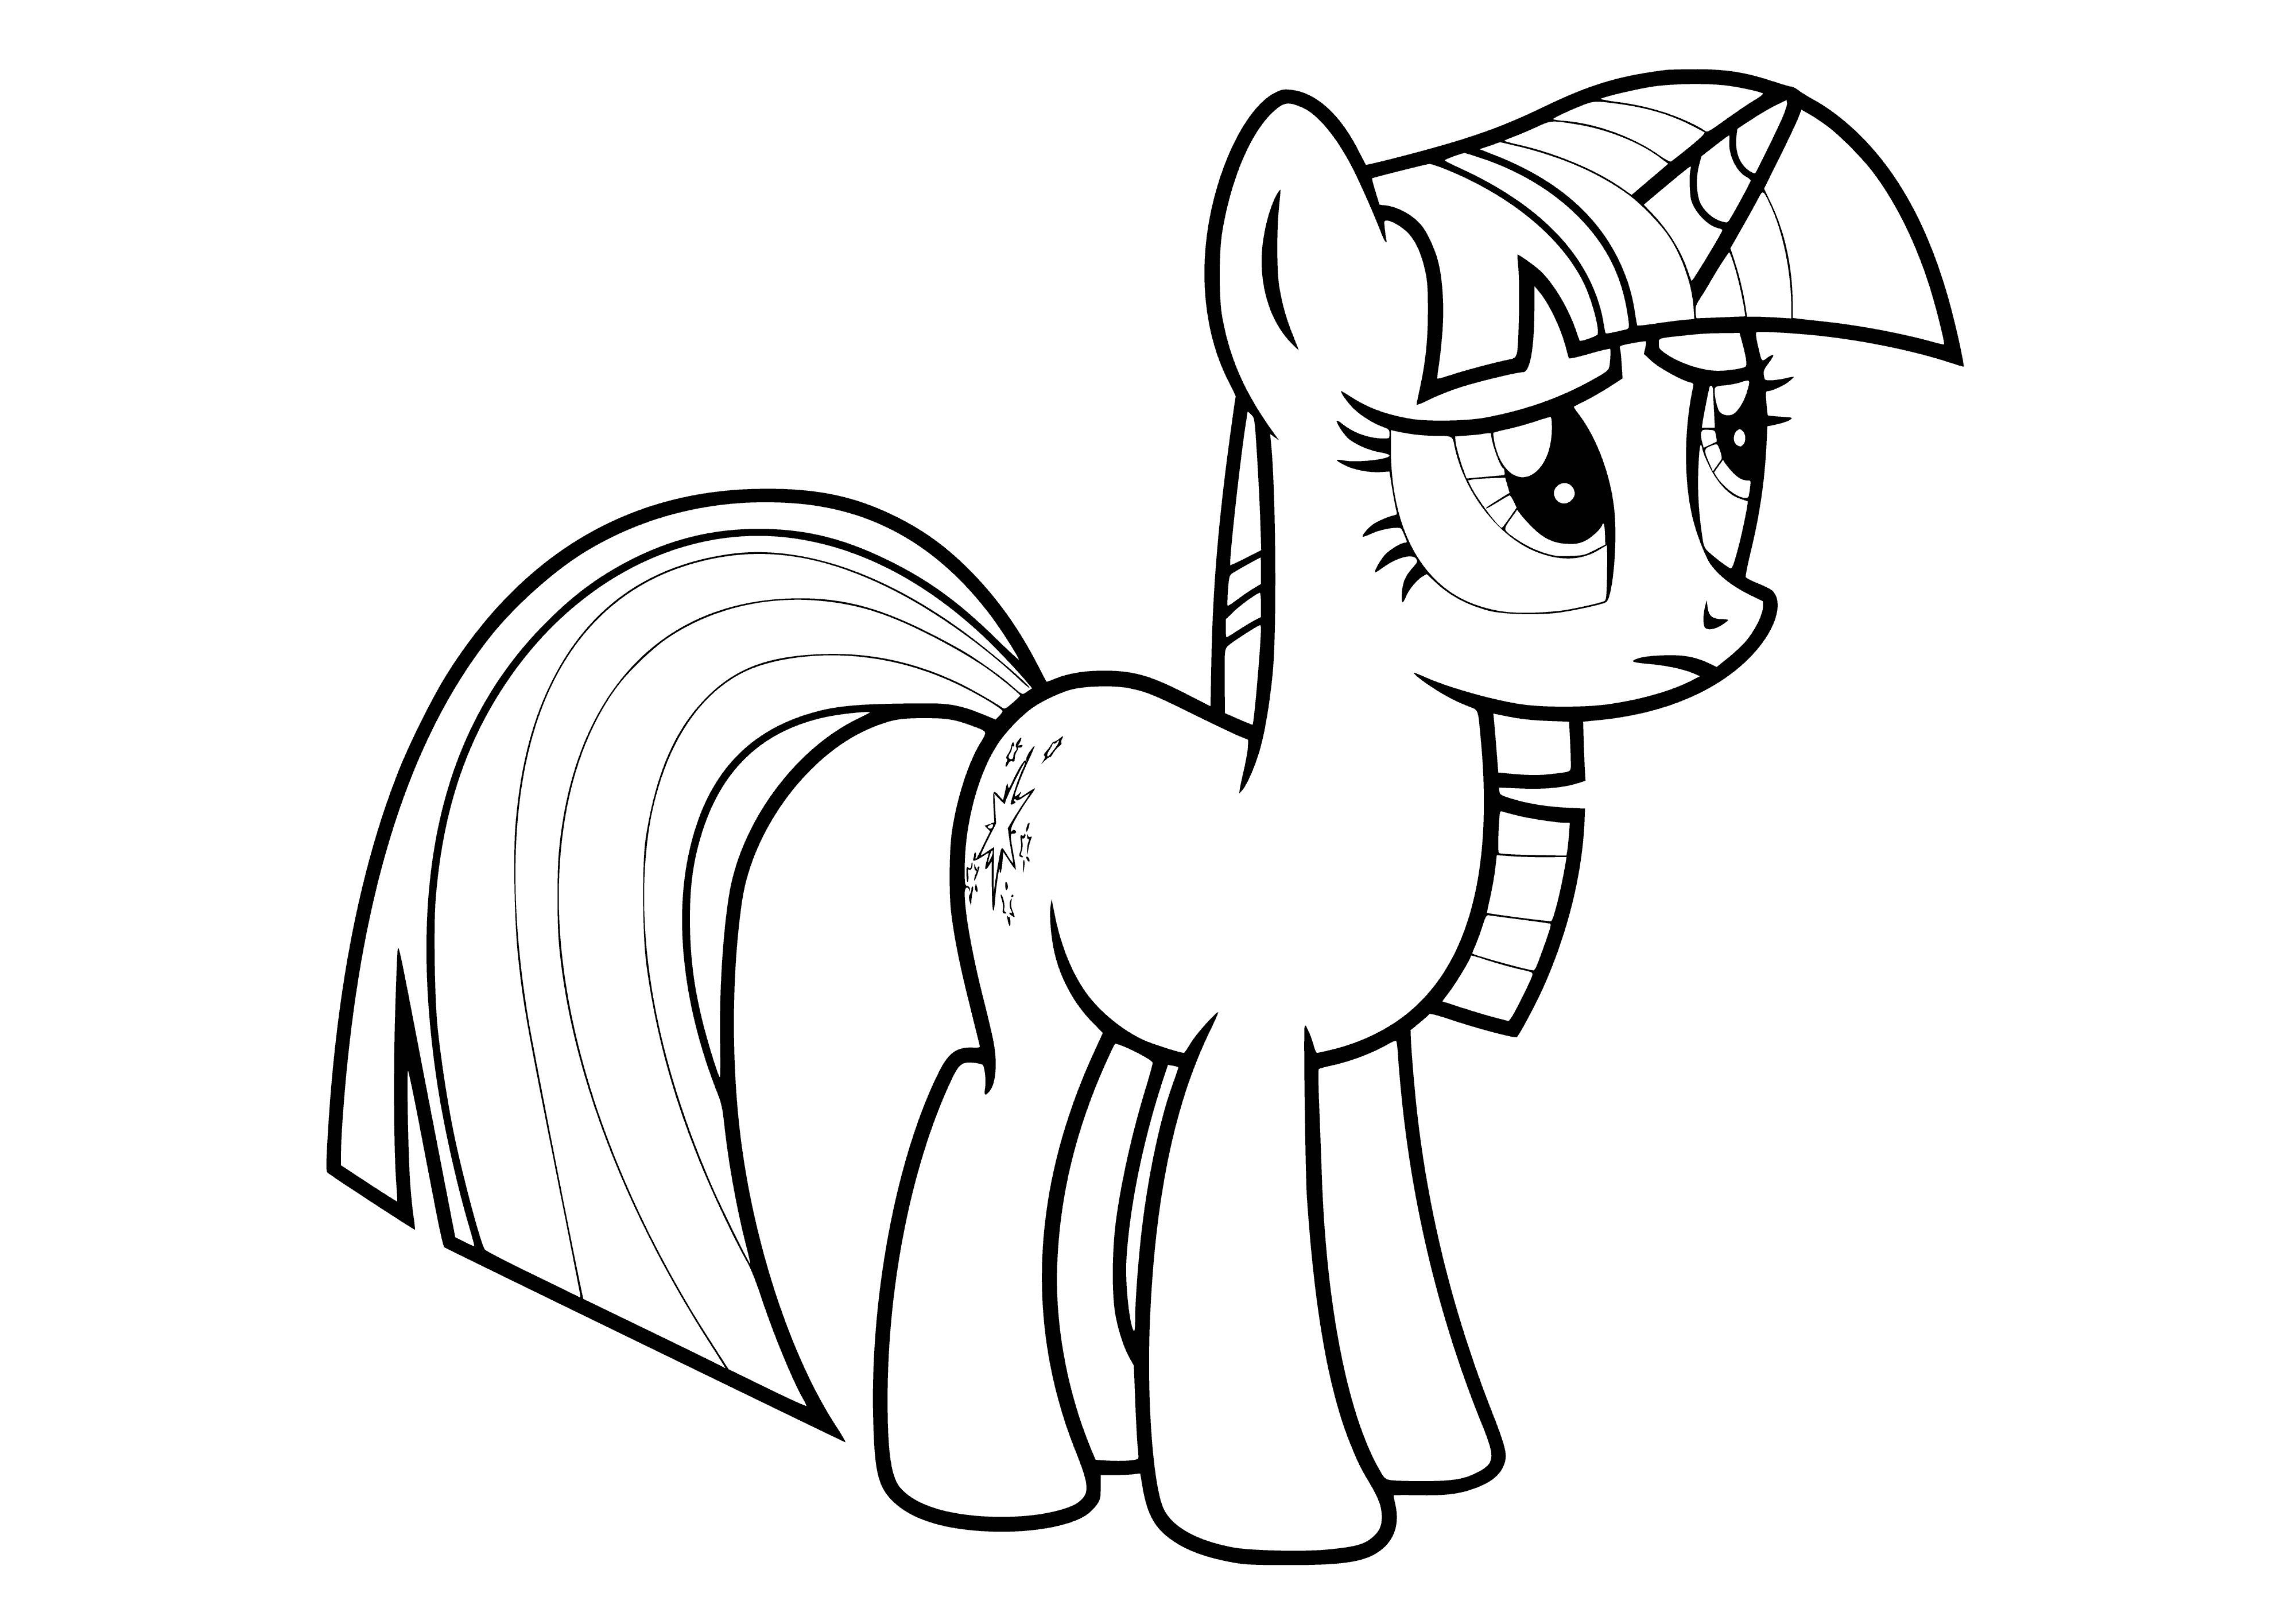 coloring page: Twilight Sparkle stands in an excavation site, looking at something in the distance amongst piles of dirt and rocks.